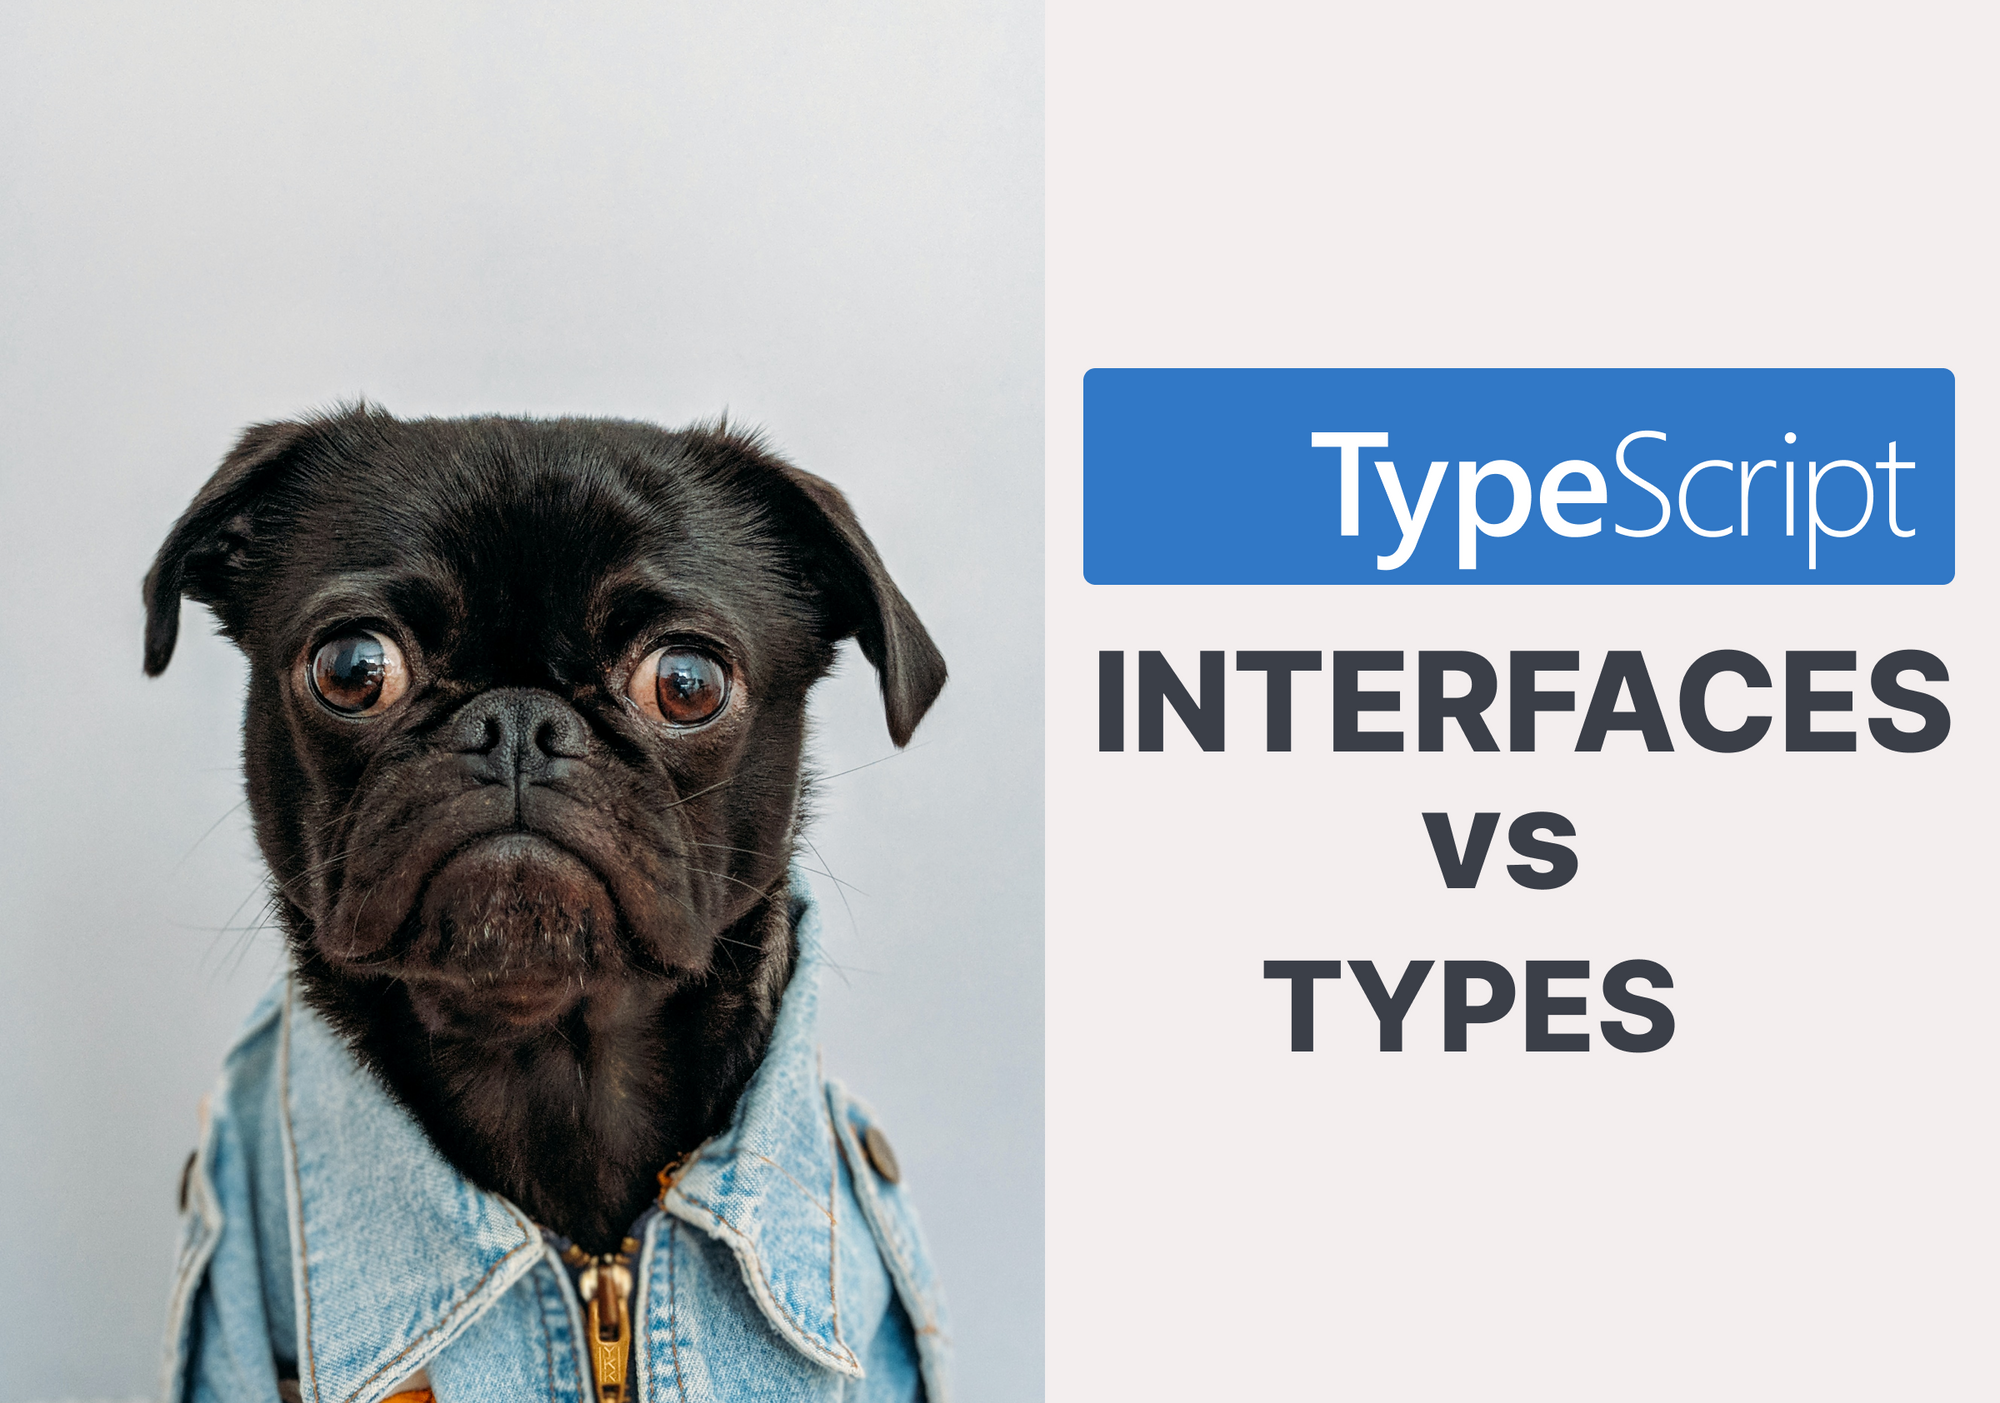 How to extend types in Typescript